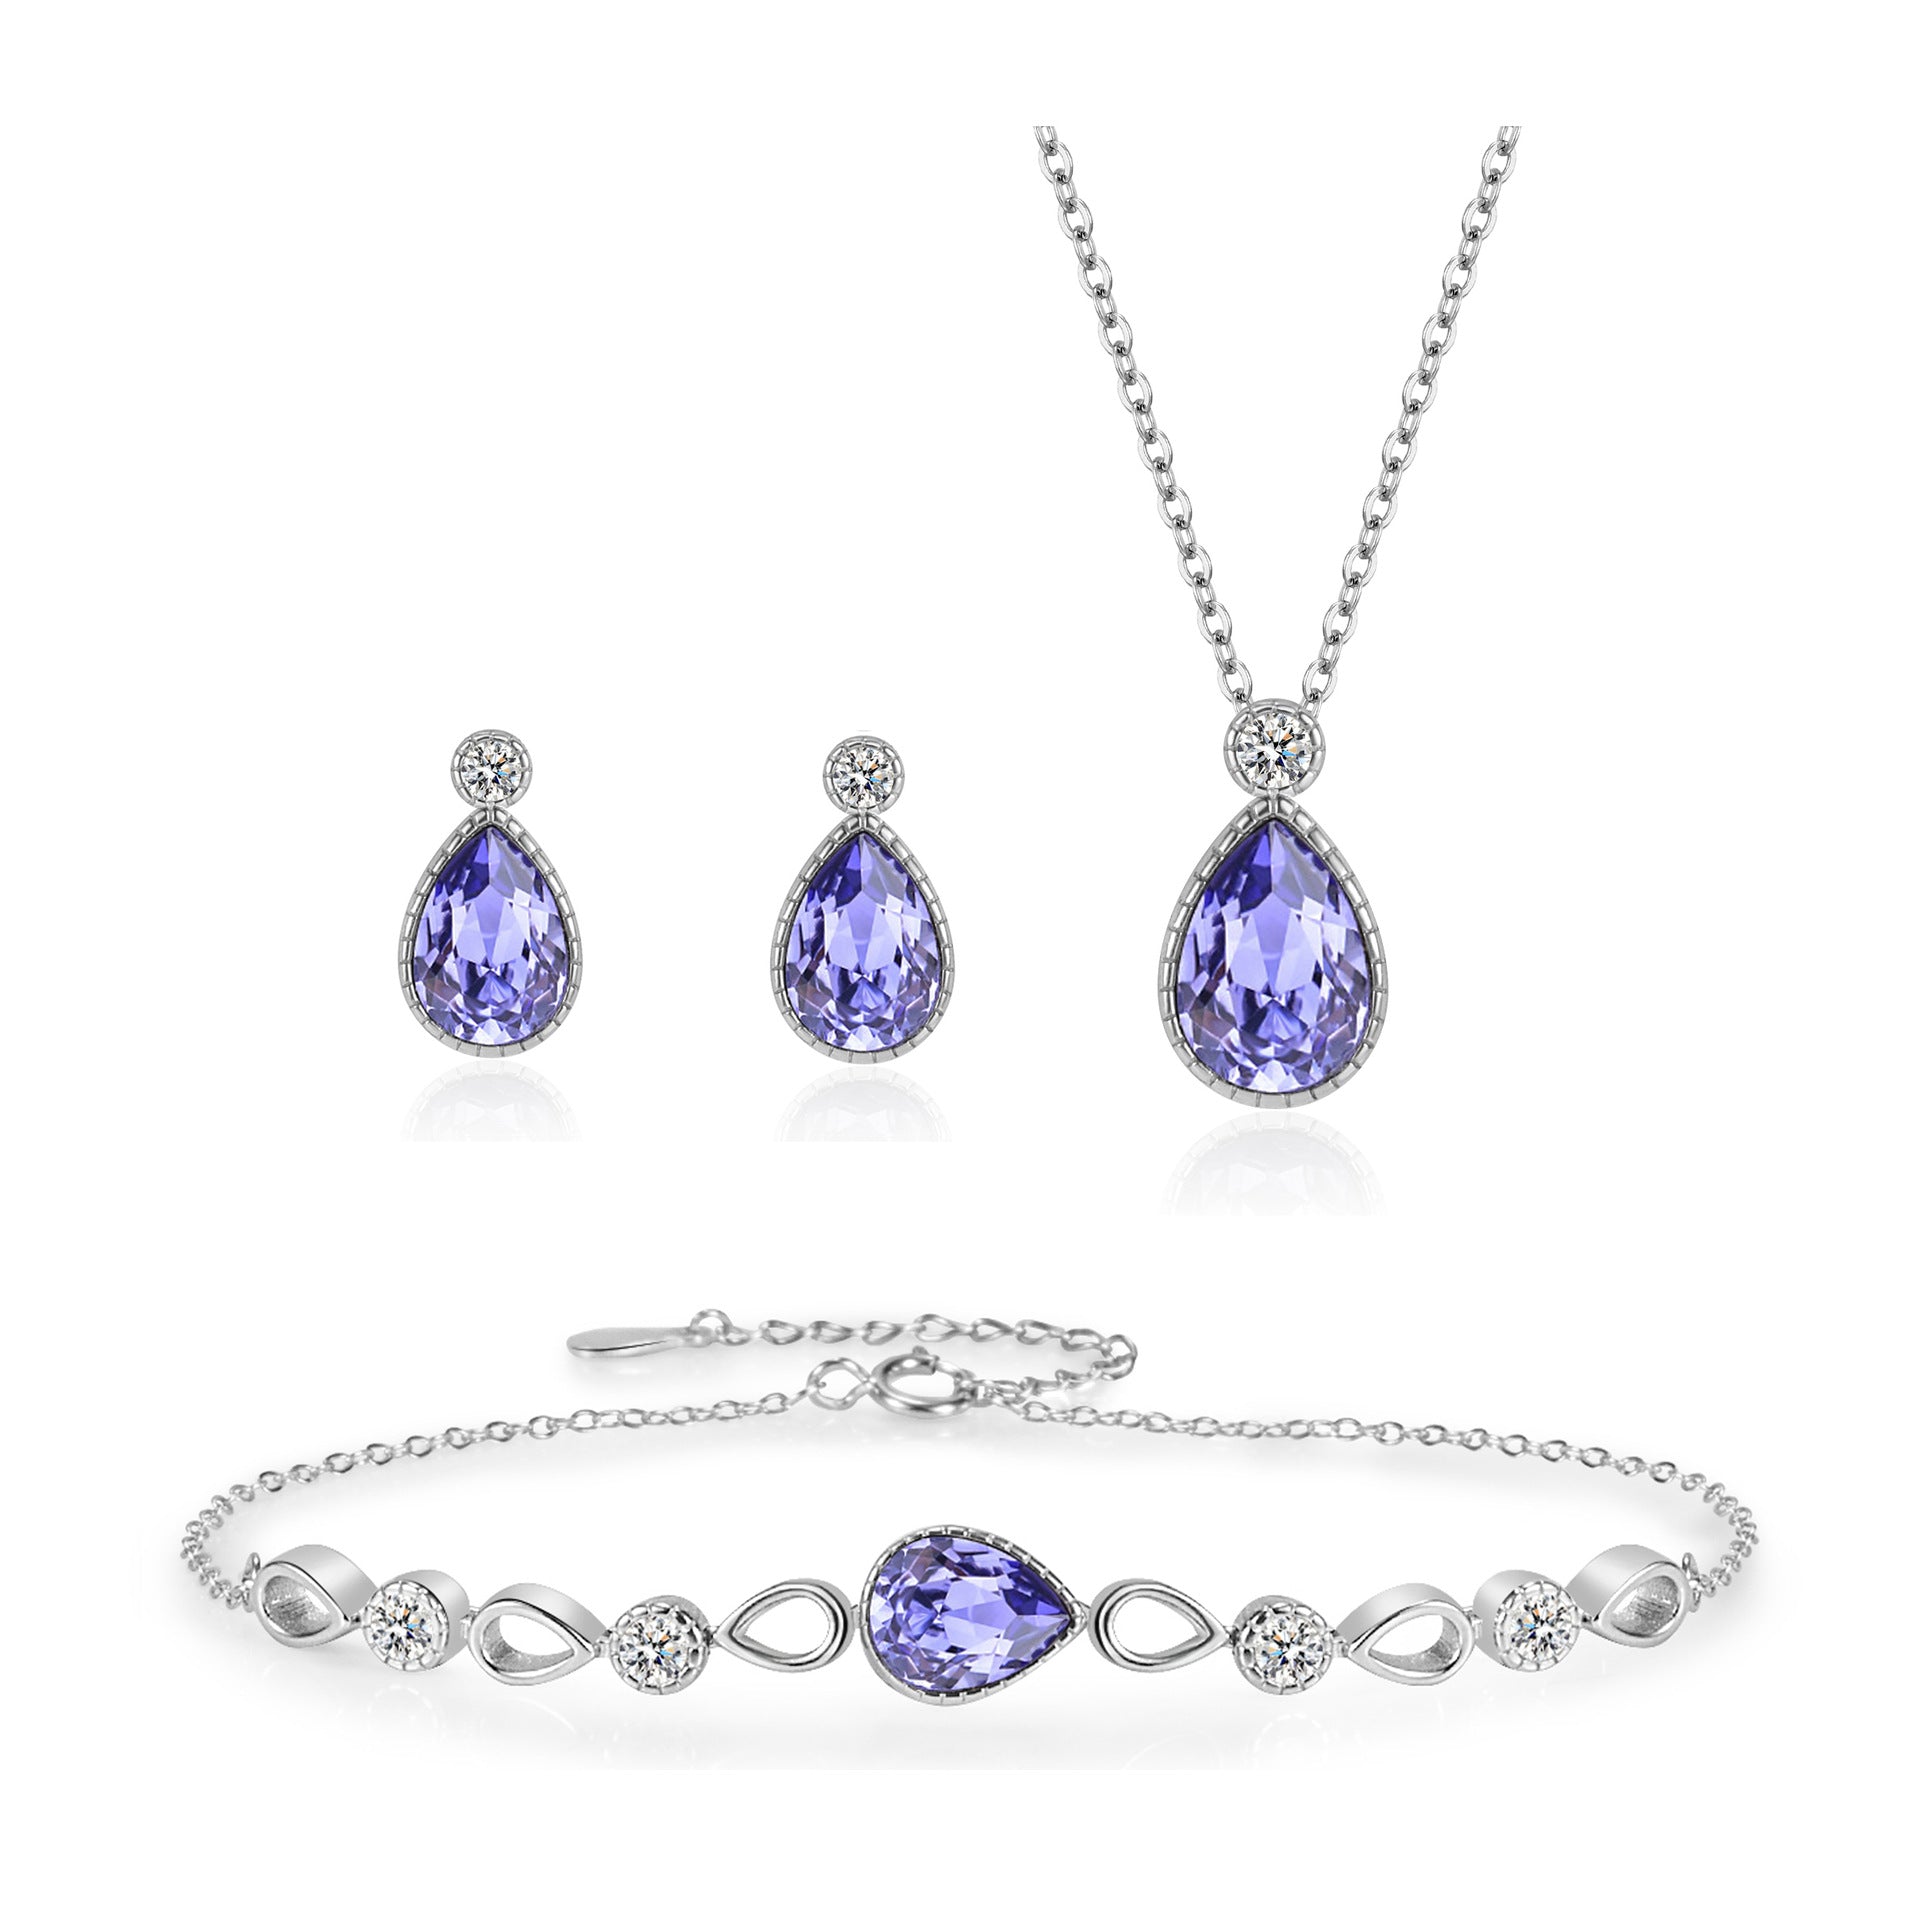 Sterling Silver Tears of the Mermaid Jewelry Set: